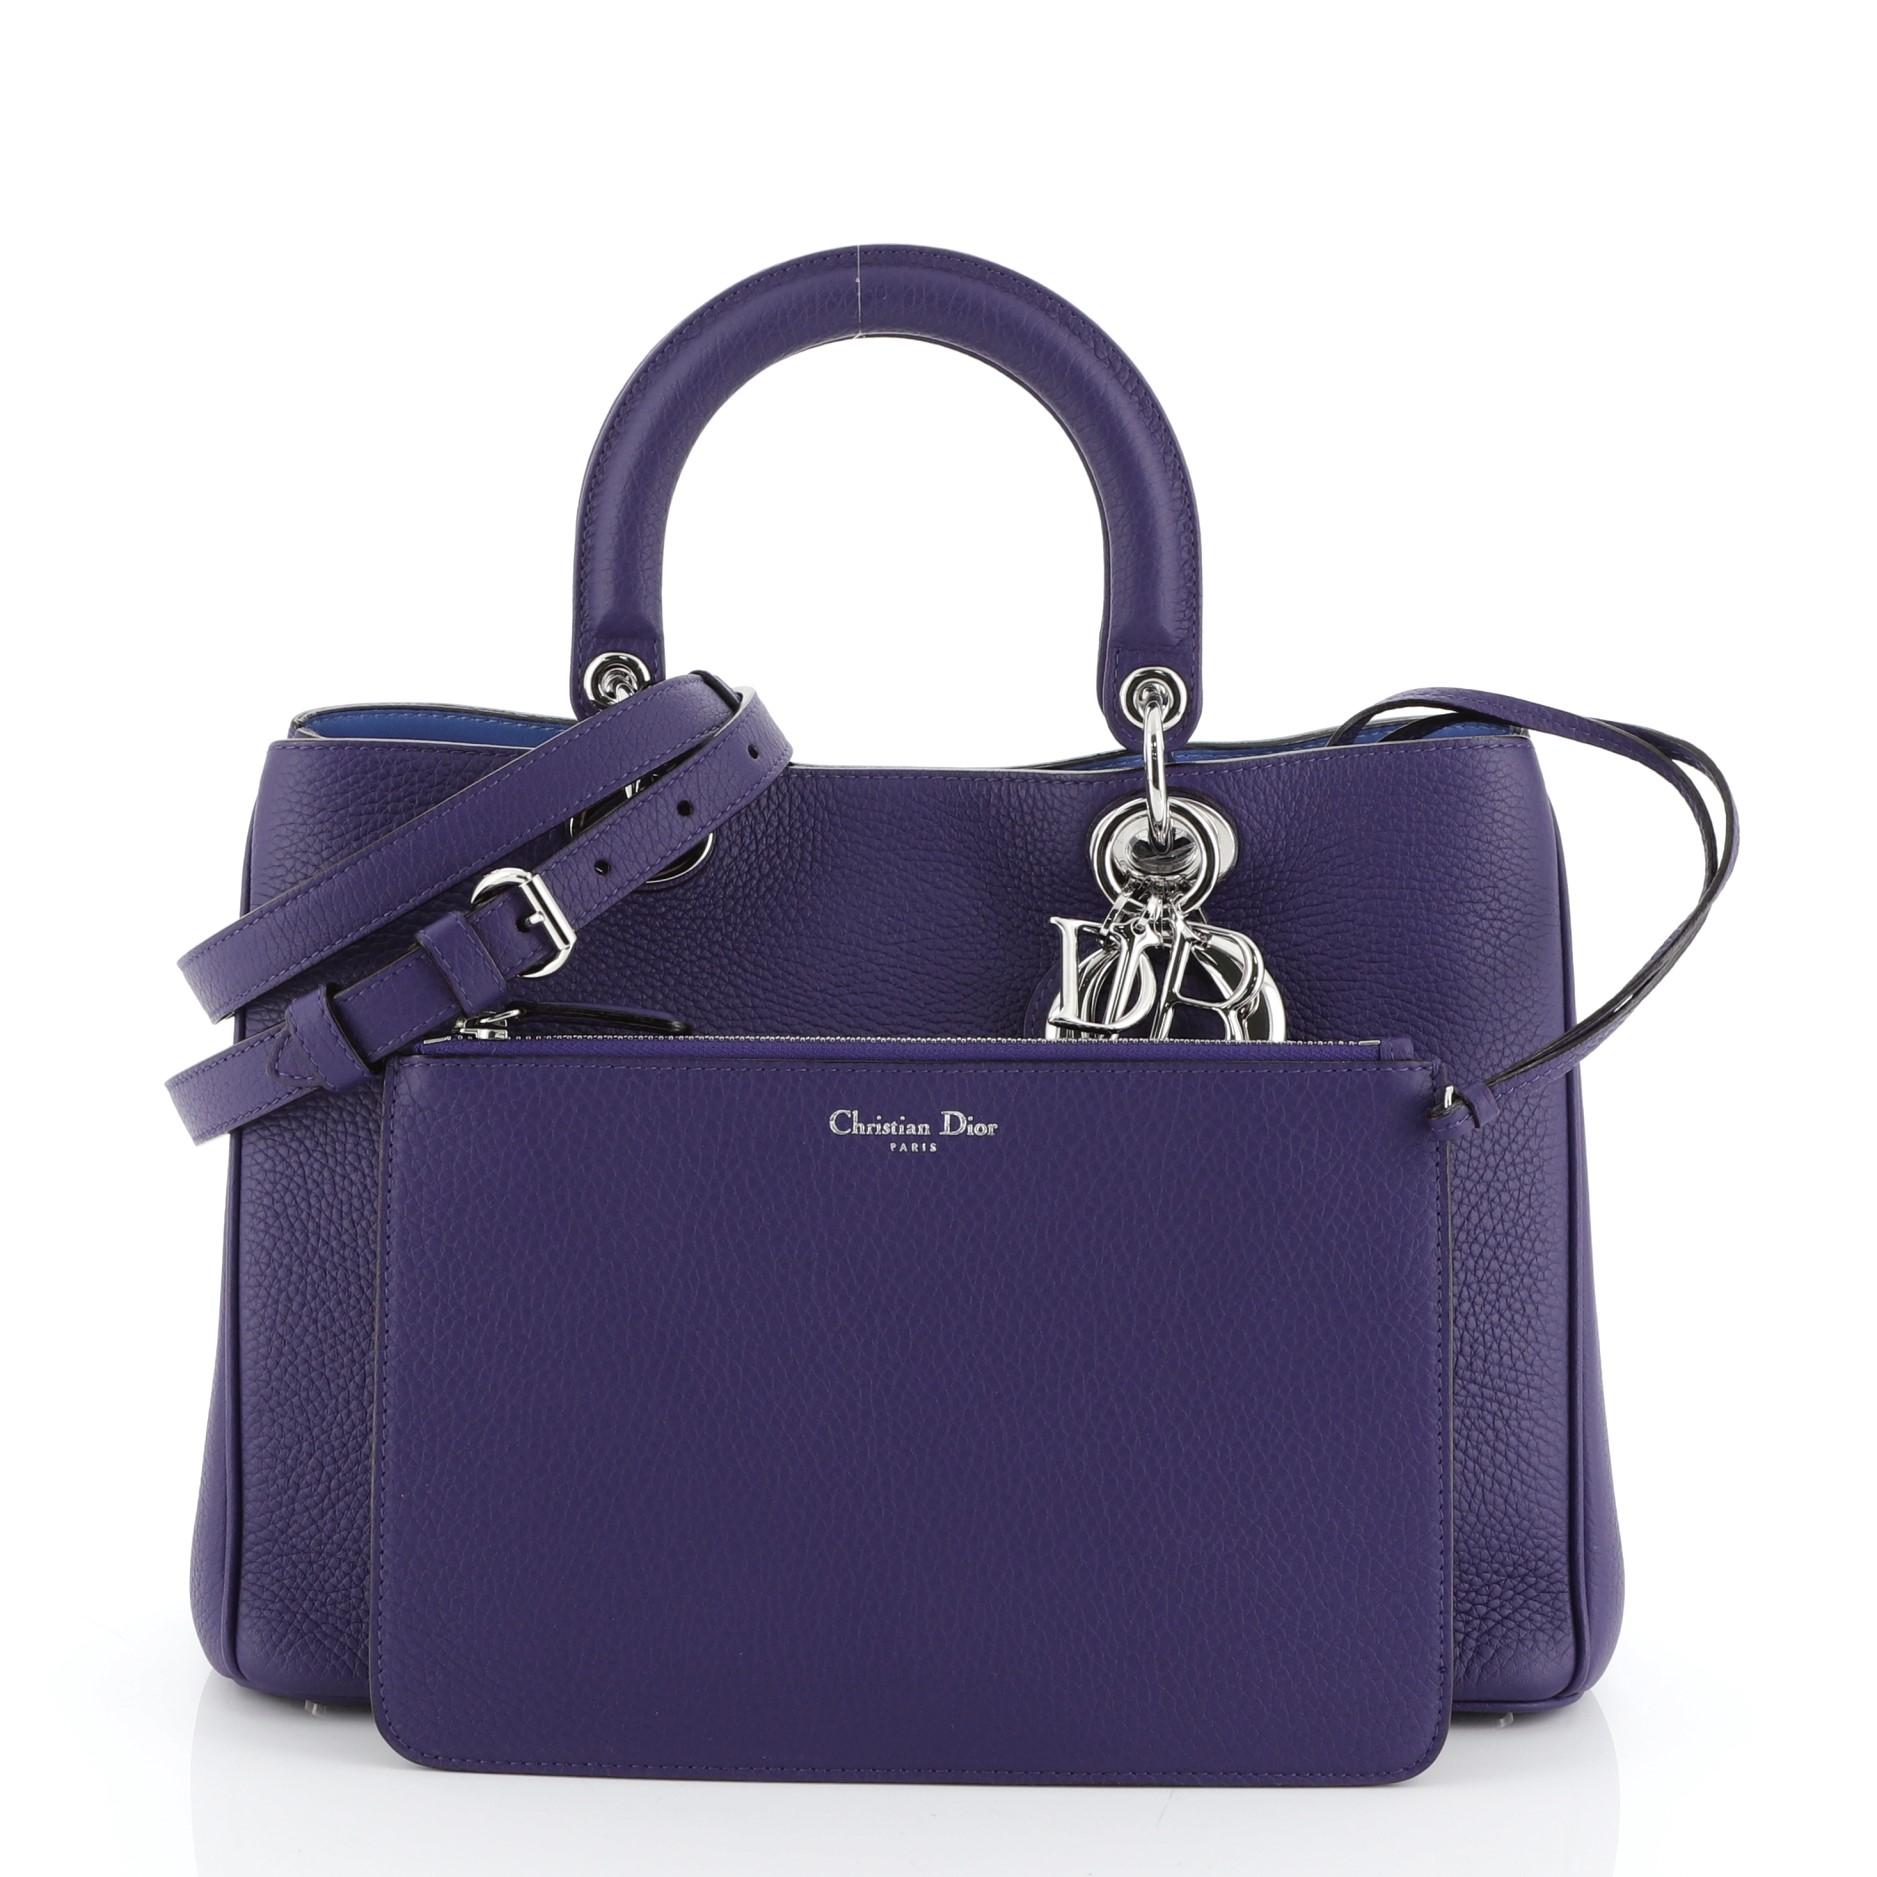 This Christian Dior Diorissimo Tote Pebbled Leather Medium, crafted from purple pebbled leather, features short dual handles with Dior charms, side snap buttons, protective base studs, and silver-tone hardware. Its magnetic snap button closure opens